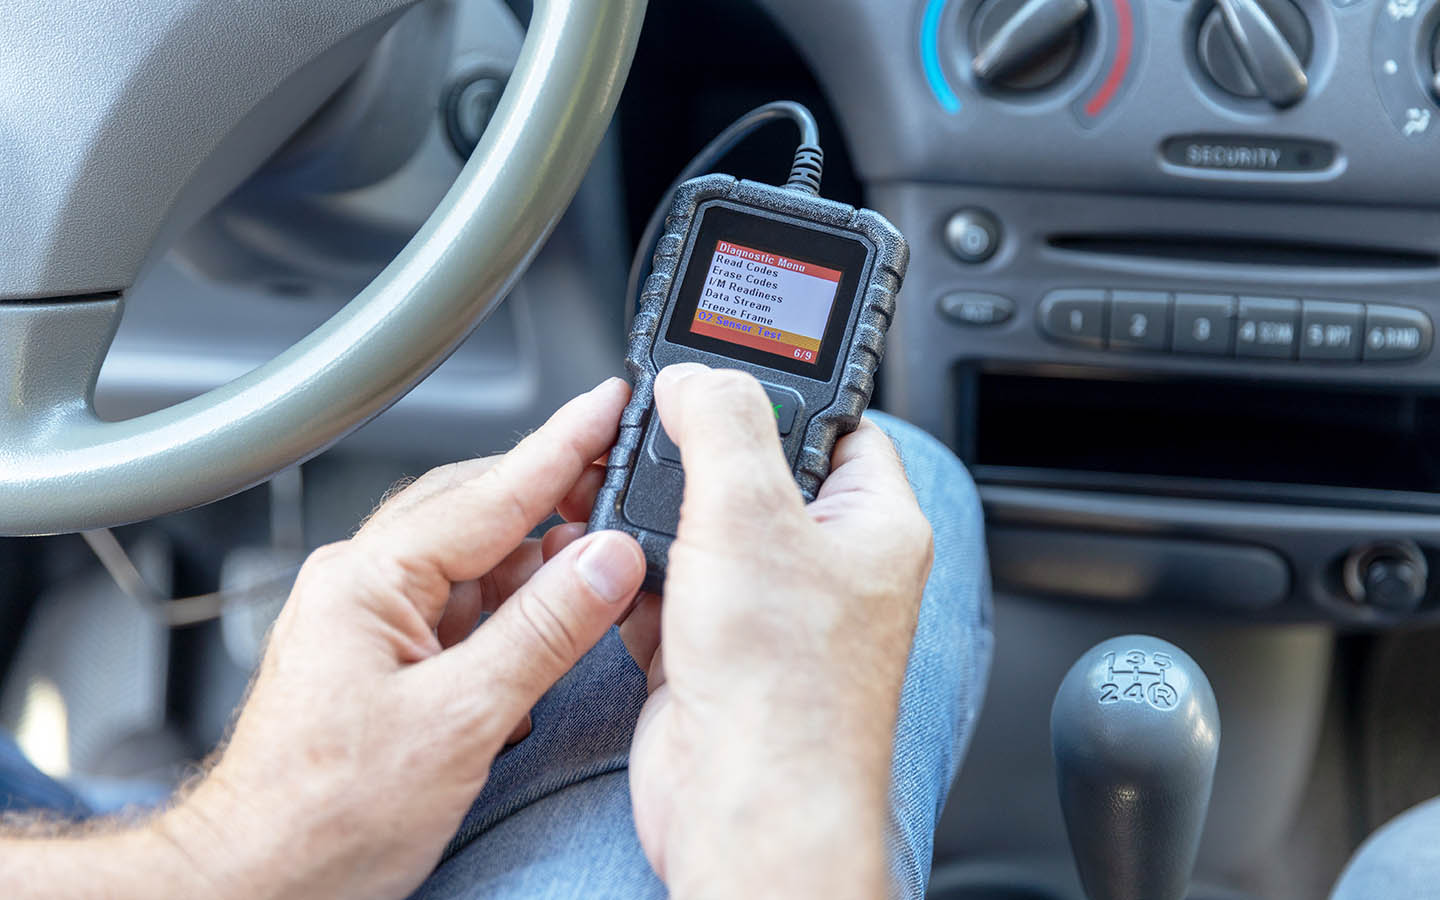 among the many easy car driving hacks, using a code reader is also one of them